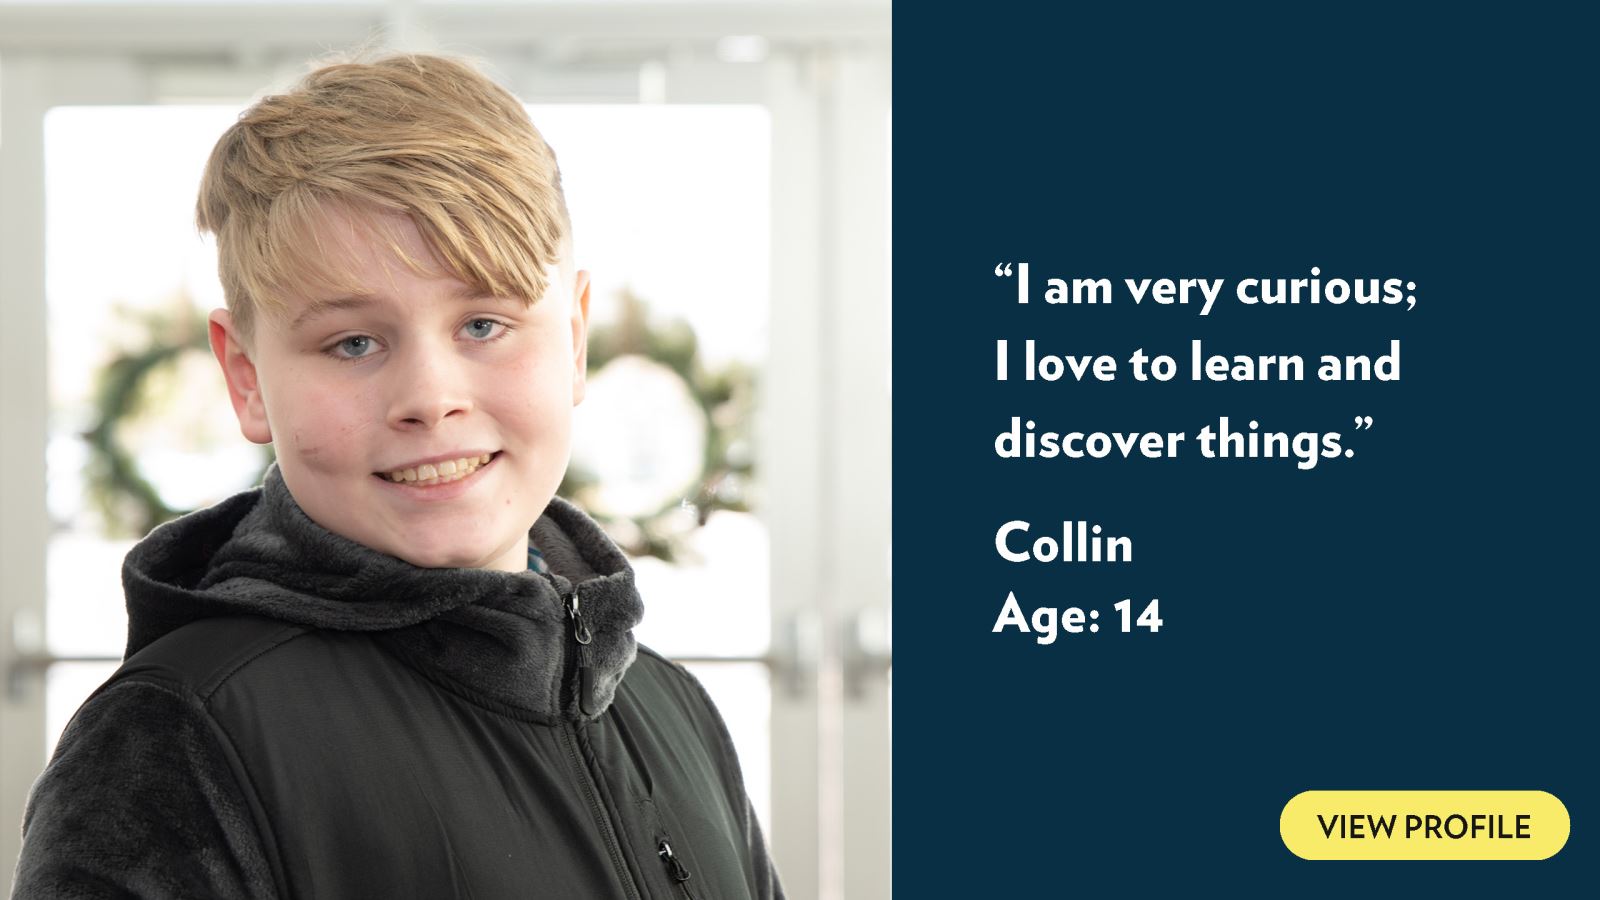 I am very curious; I love to learn and discover things. Collin, age 14. View profile.